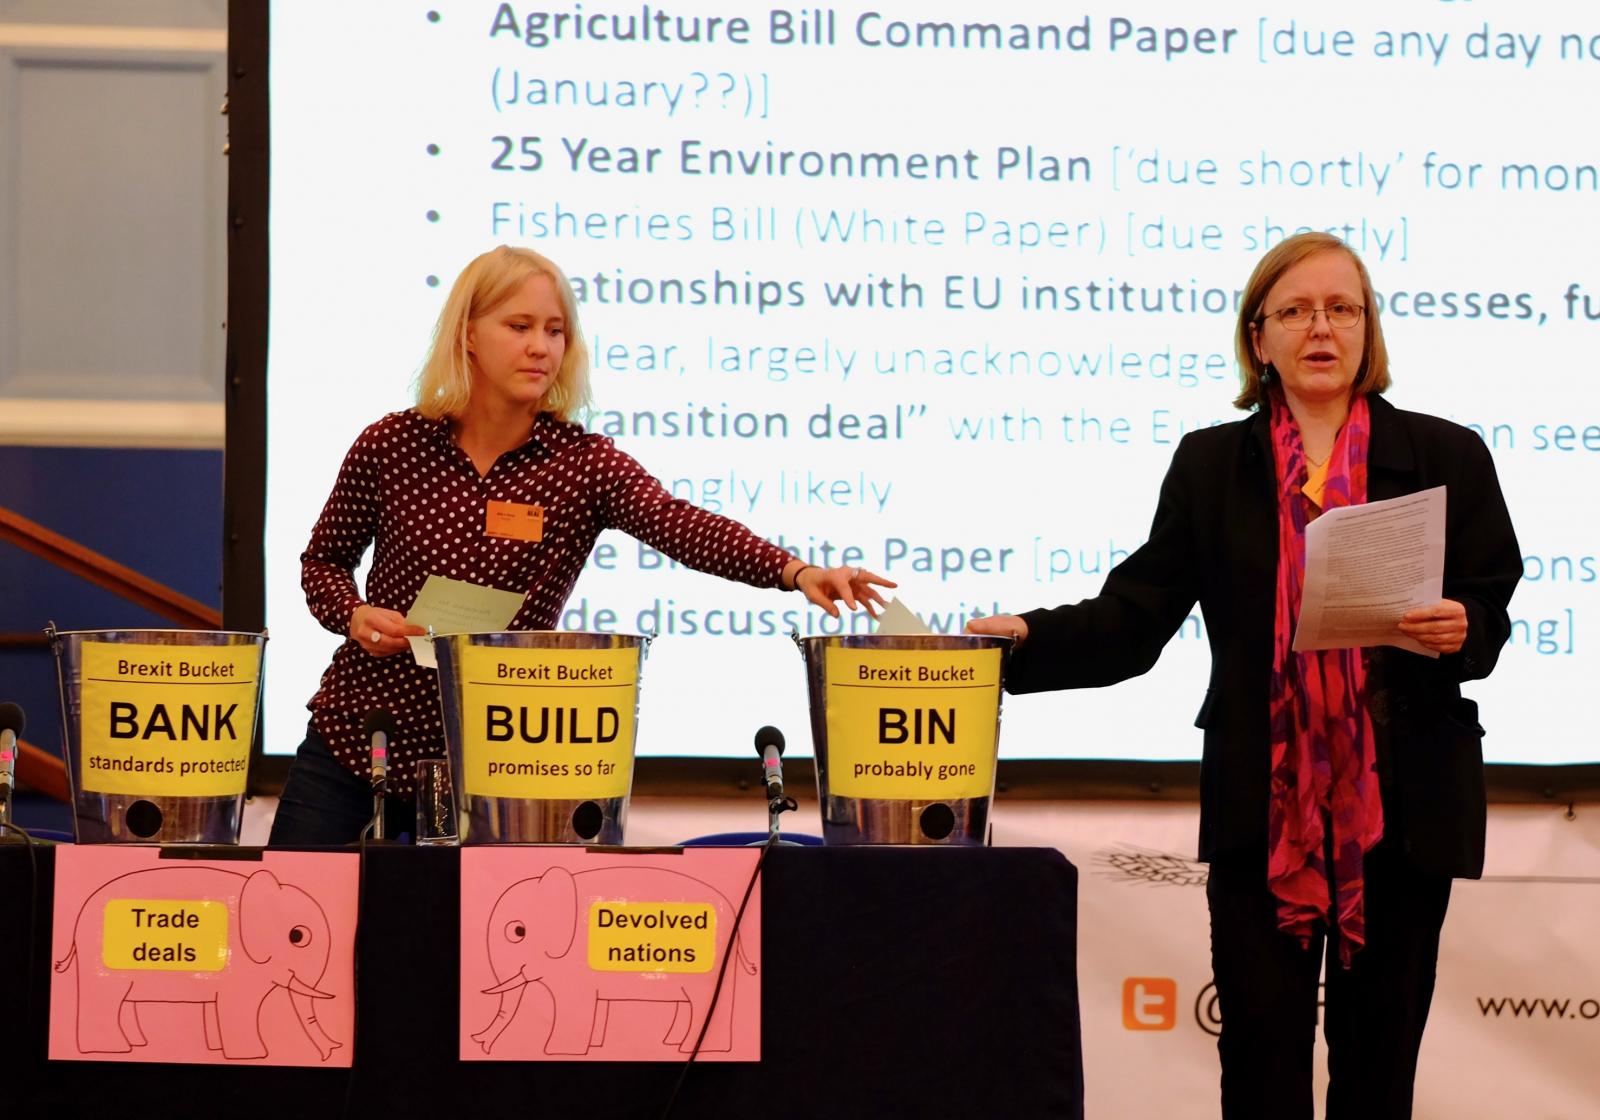 Sustain's Abbi Kent (left) and Kath Dalmeny (right) explain the Brexit state of play with the aid of three buckets, Oxford Real Farming Conference main stage, January 2018